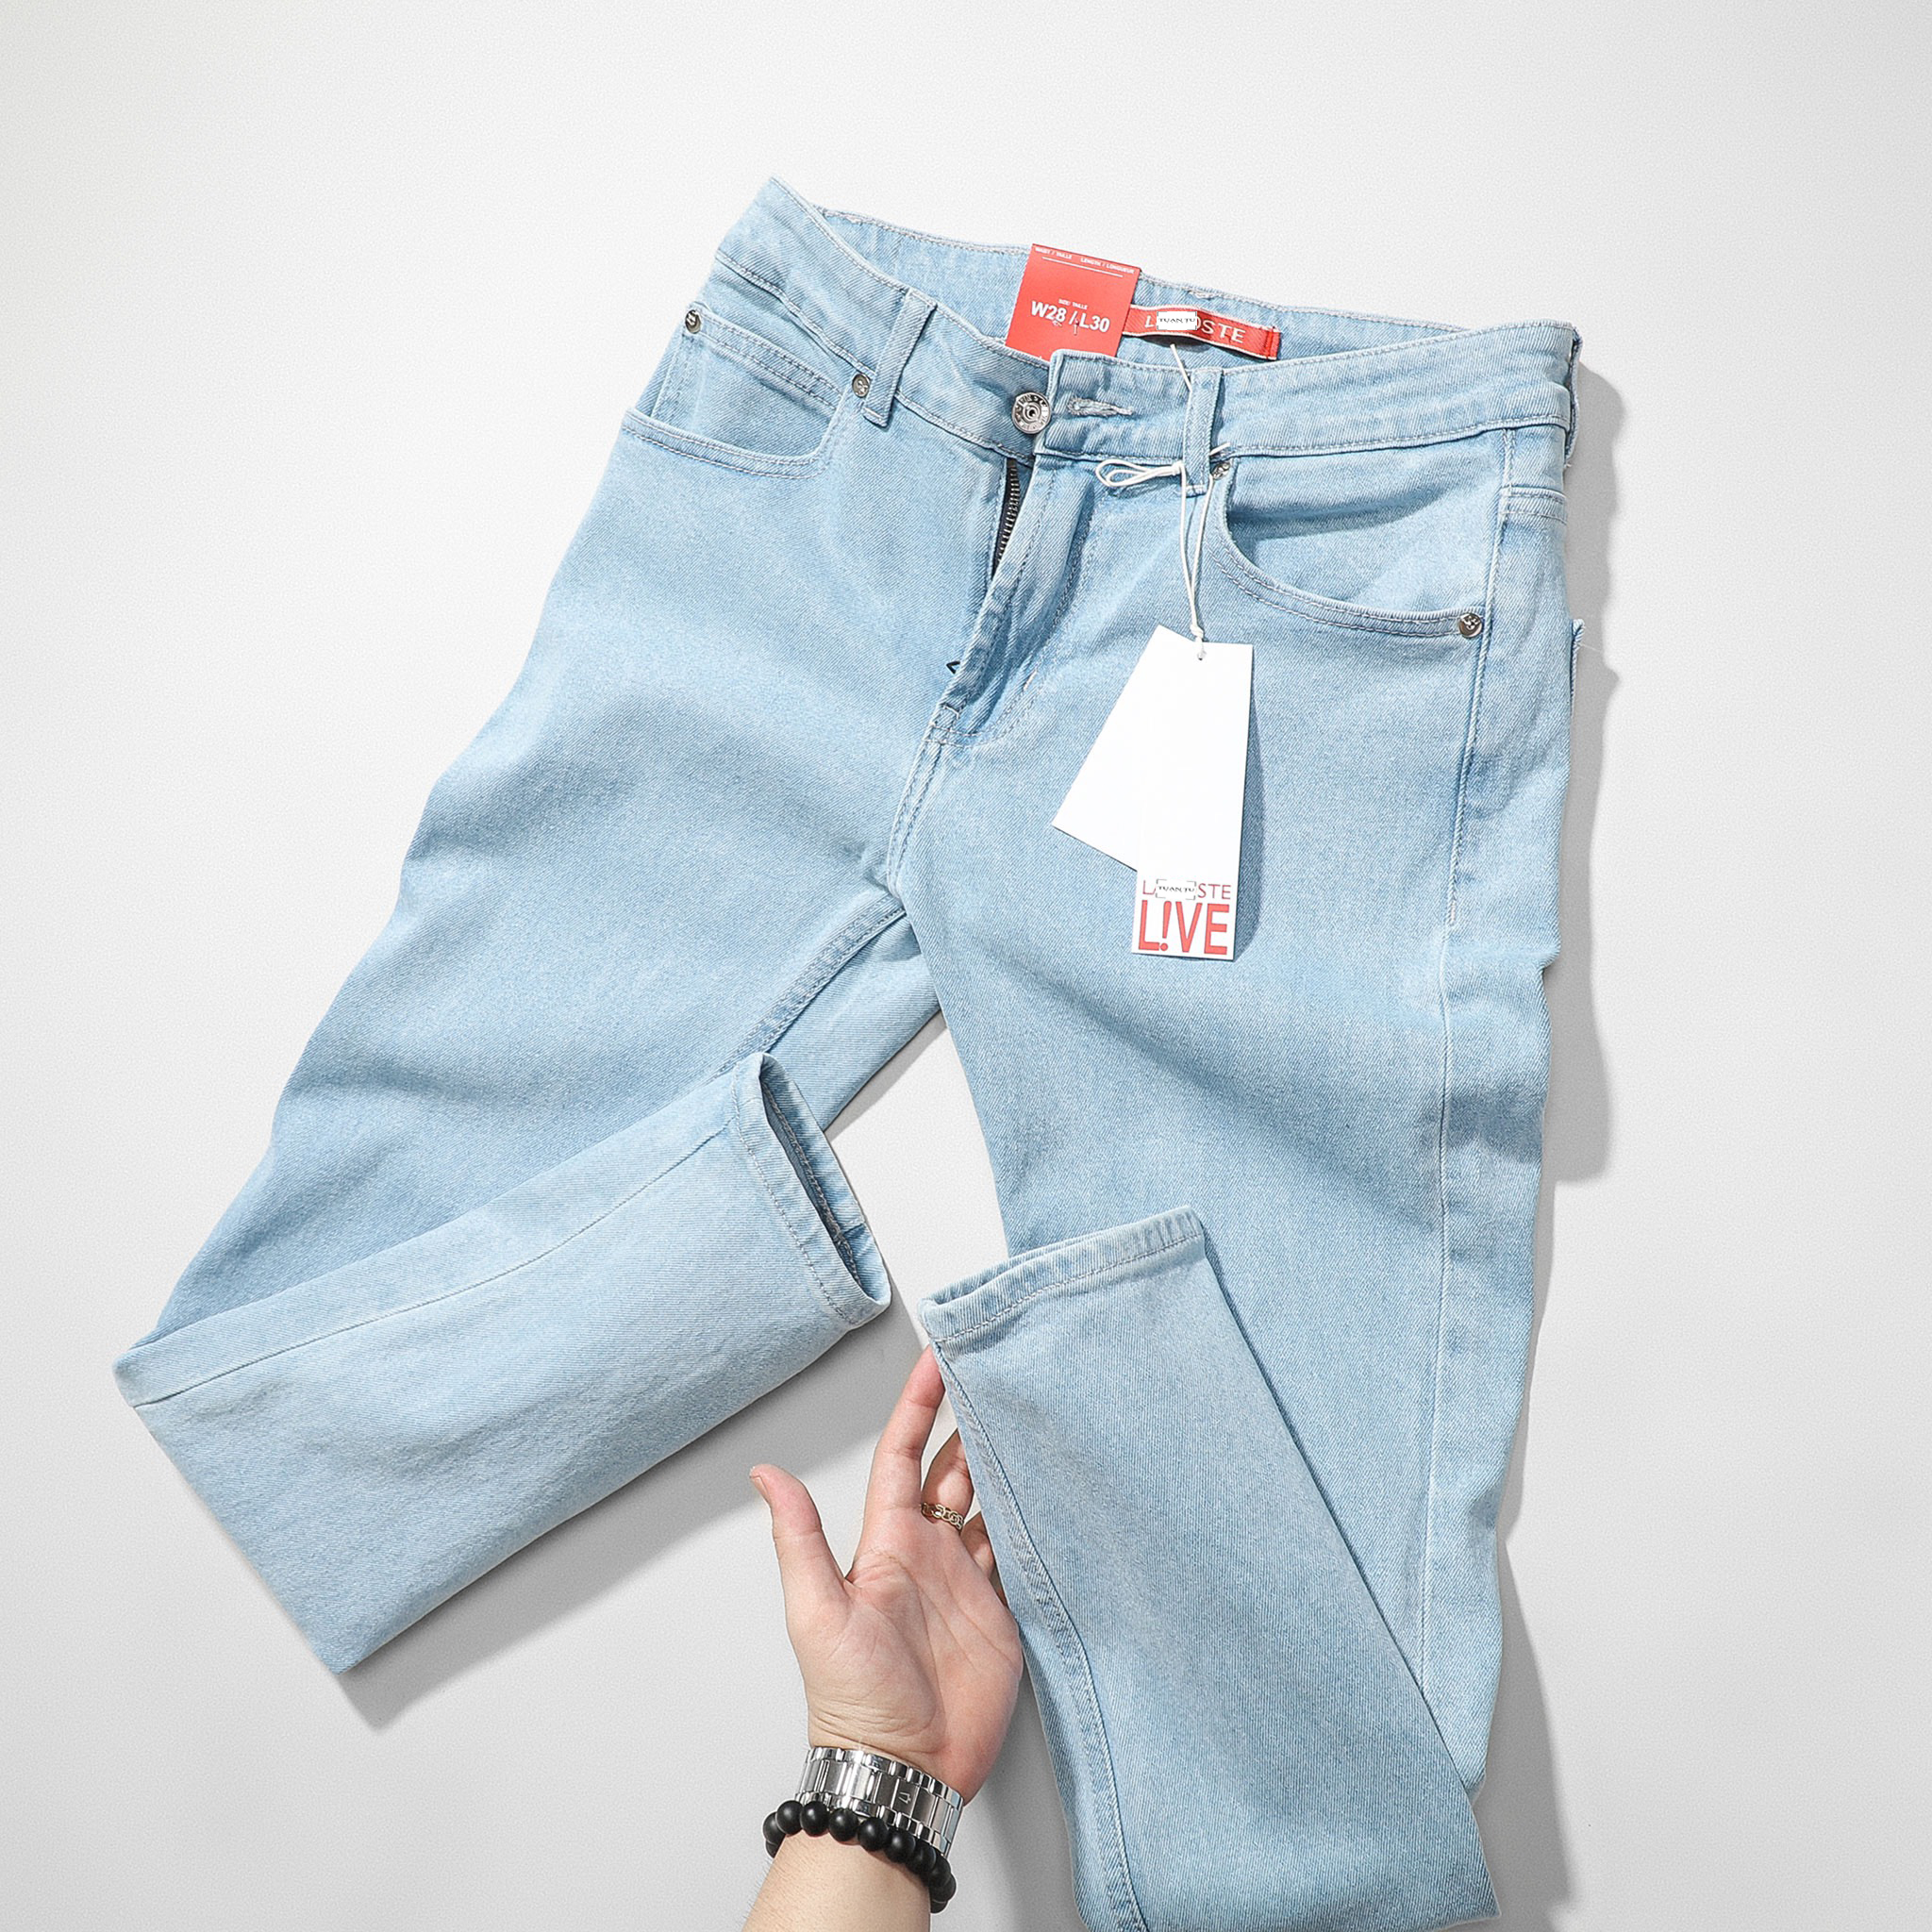 Quần jeans nam xanh relax fit (jean for men with blue color) - JA 912